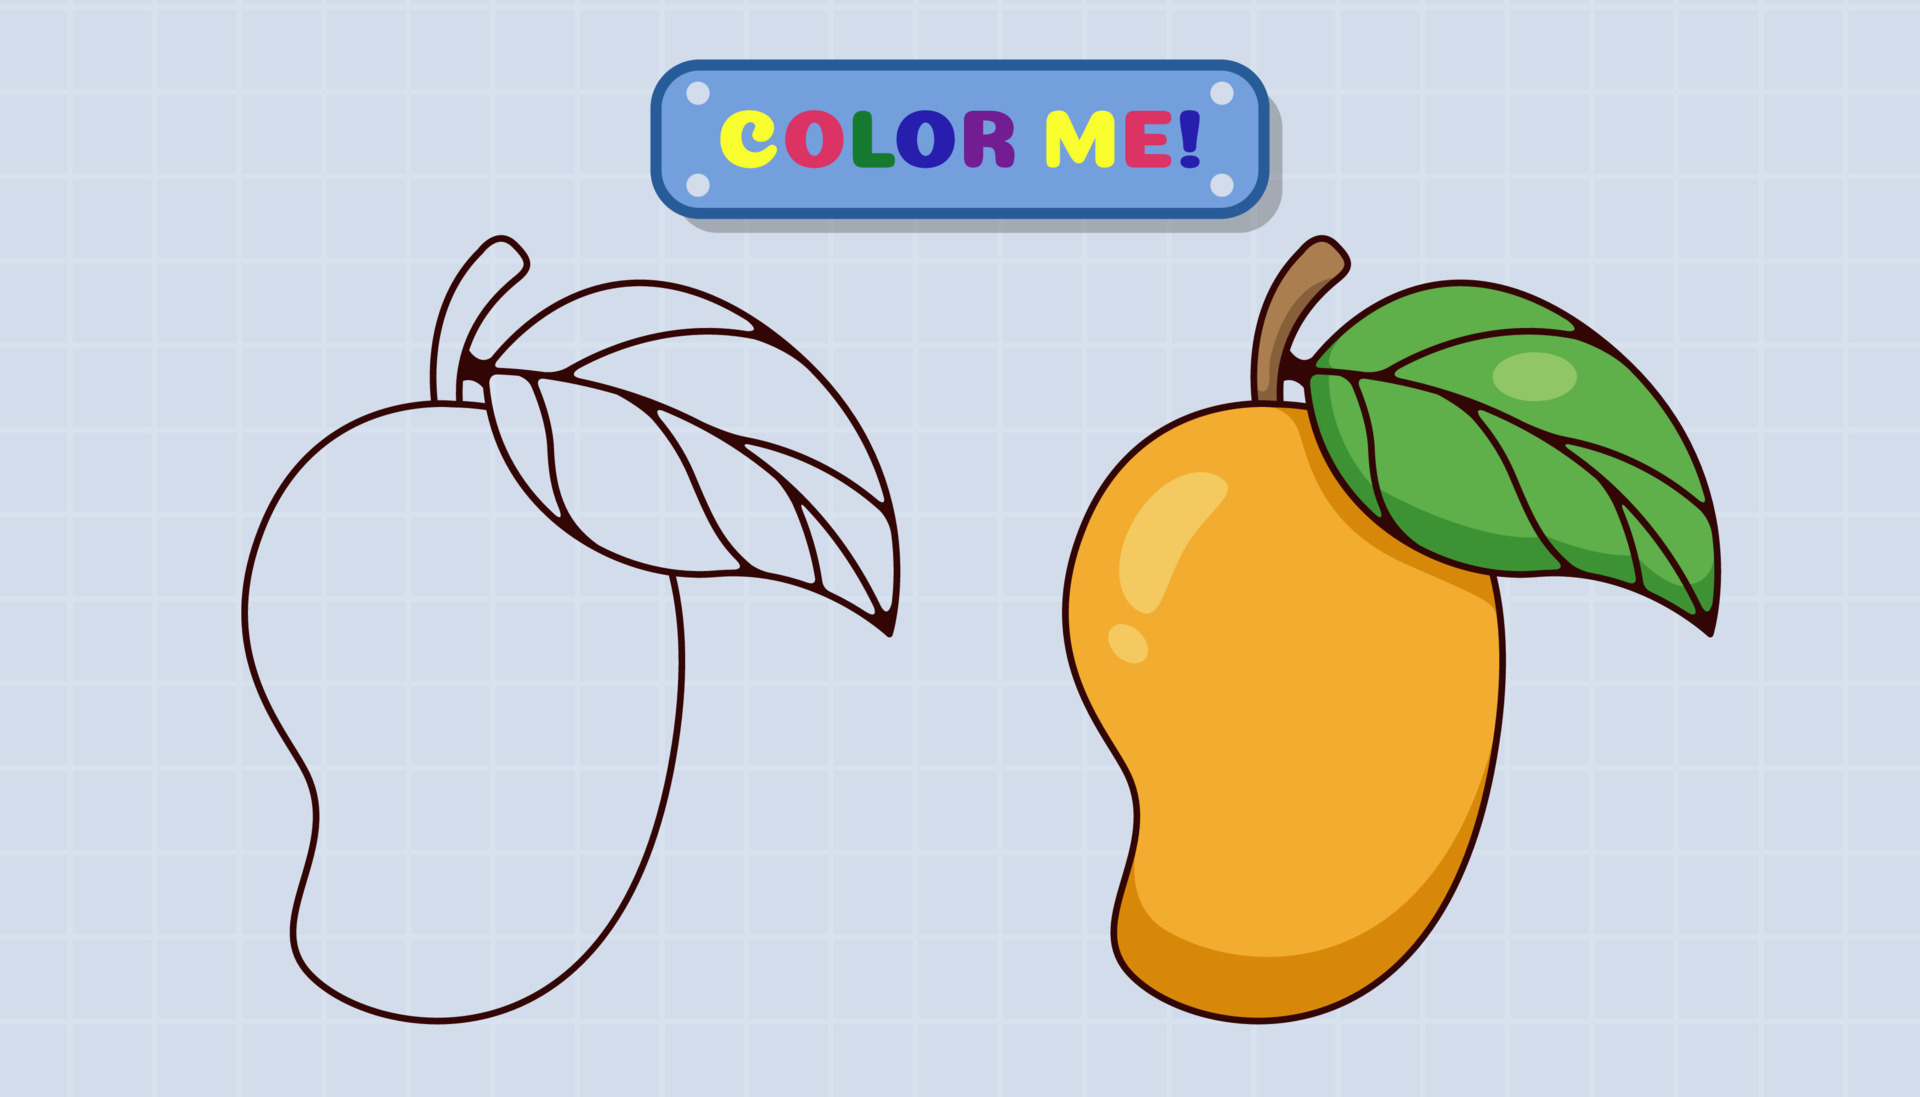 How To Draw A Mango Tree Easy @ Howtodraw.pics